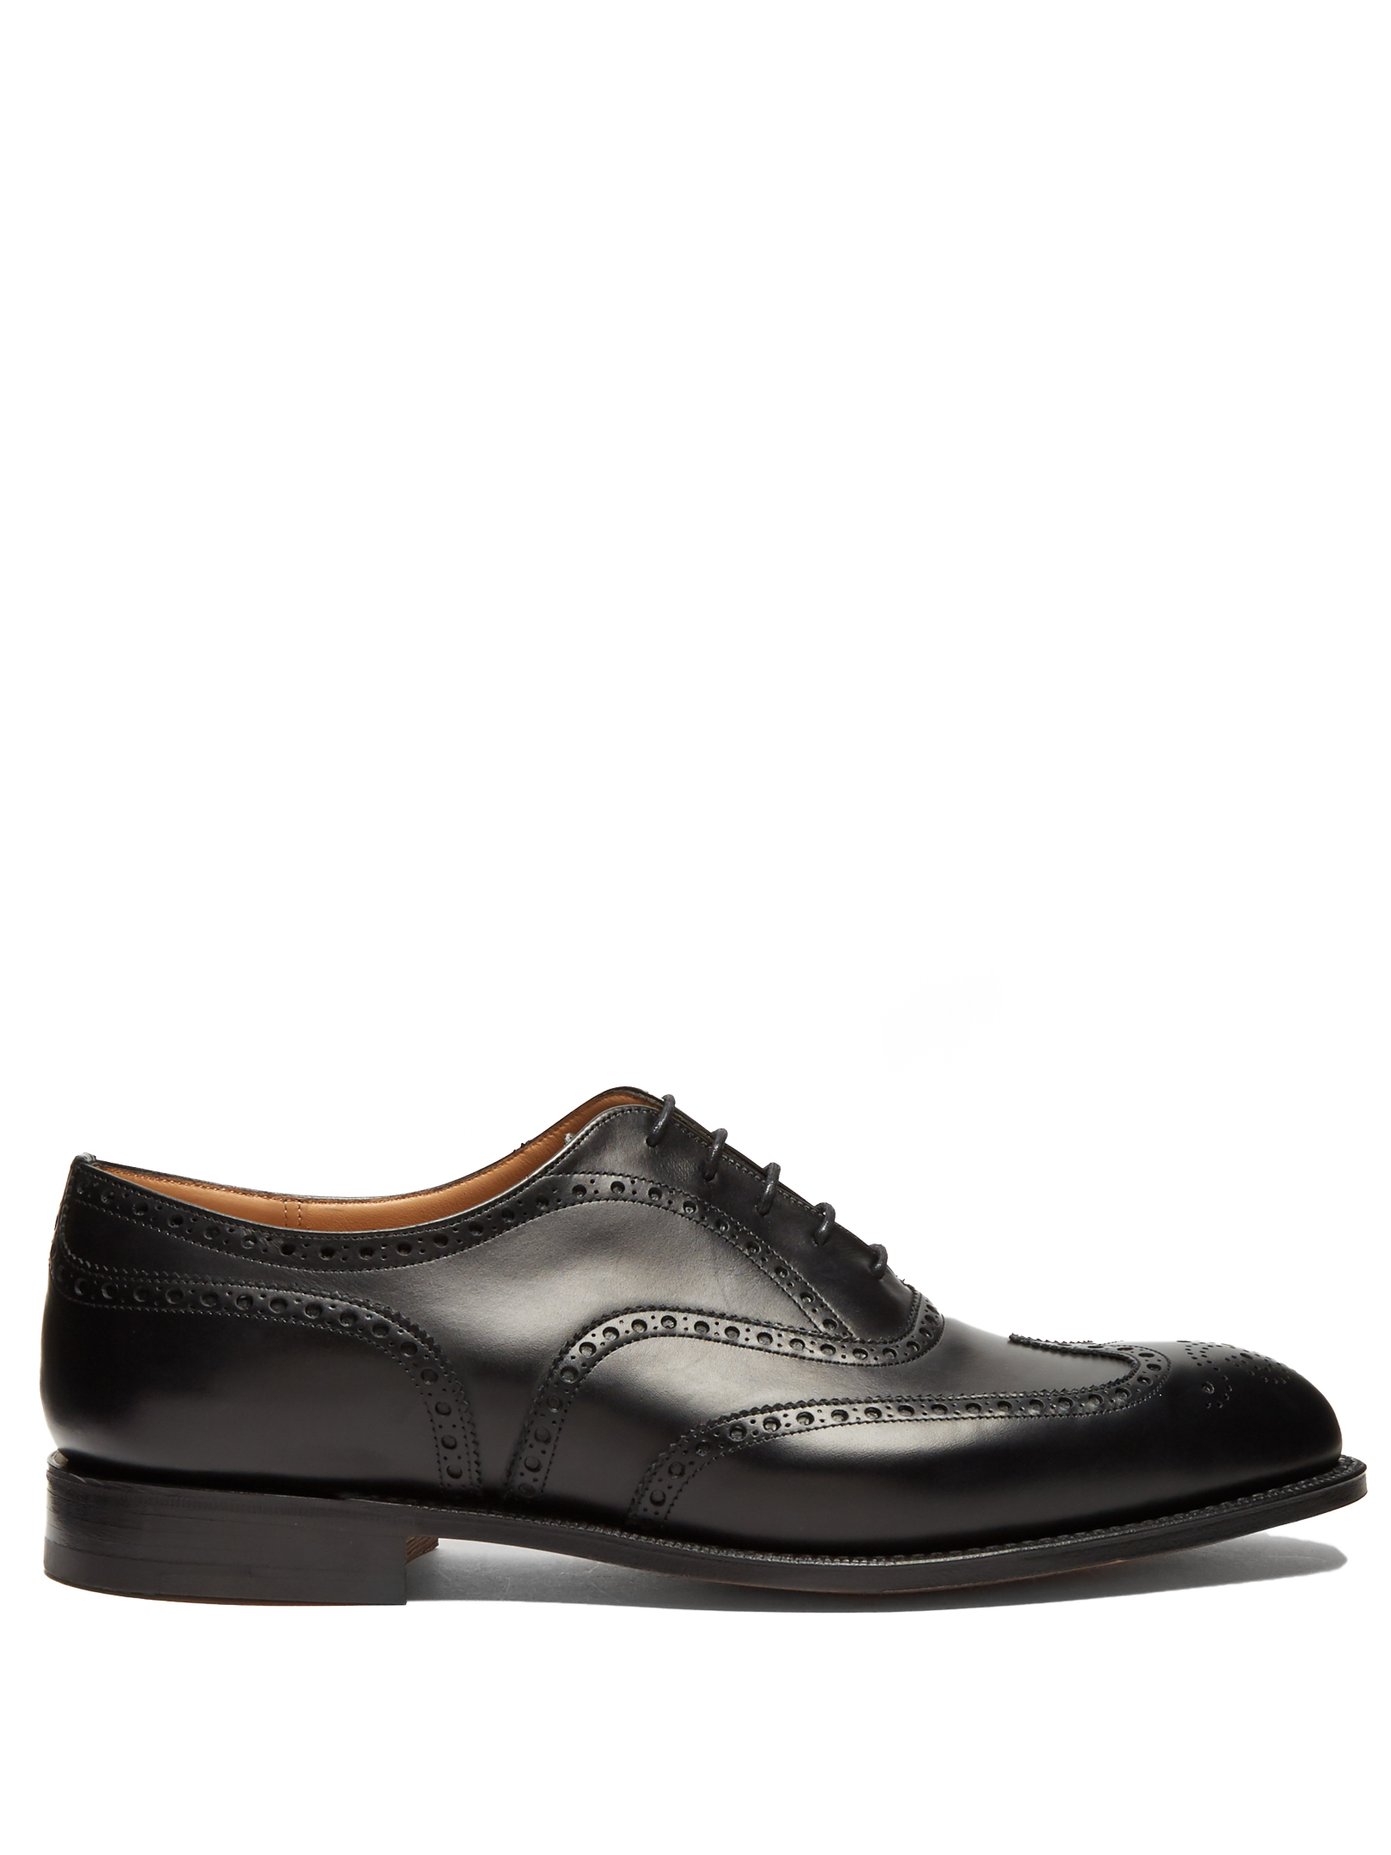 Chetwynd leather brogues | Church's 